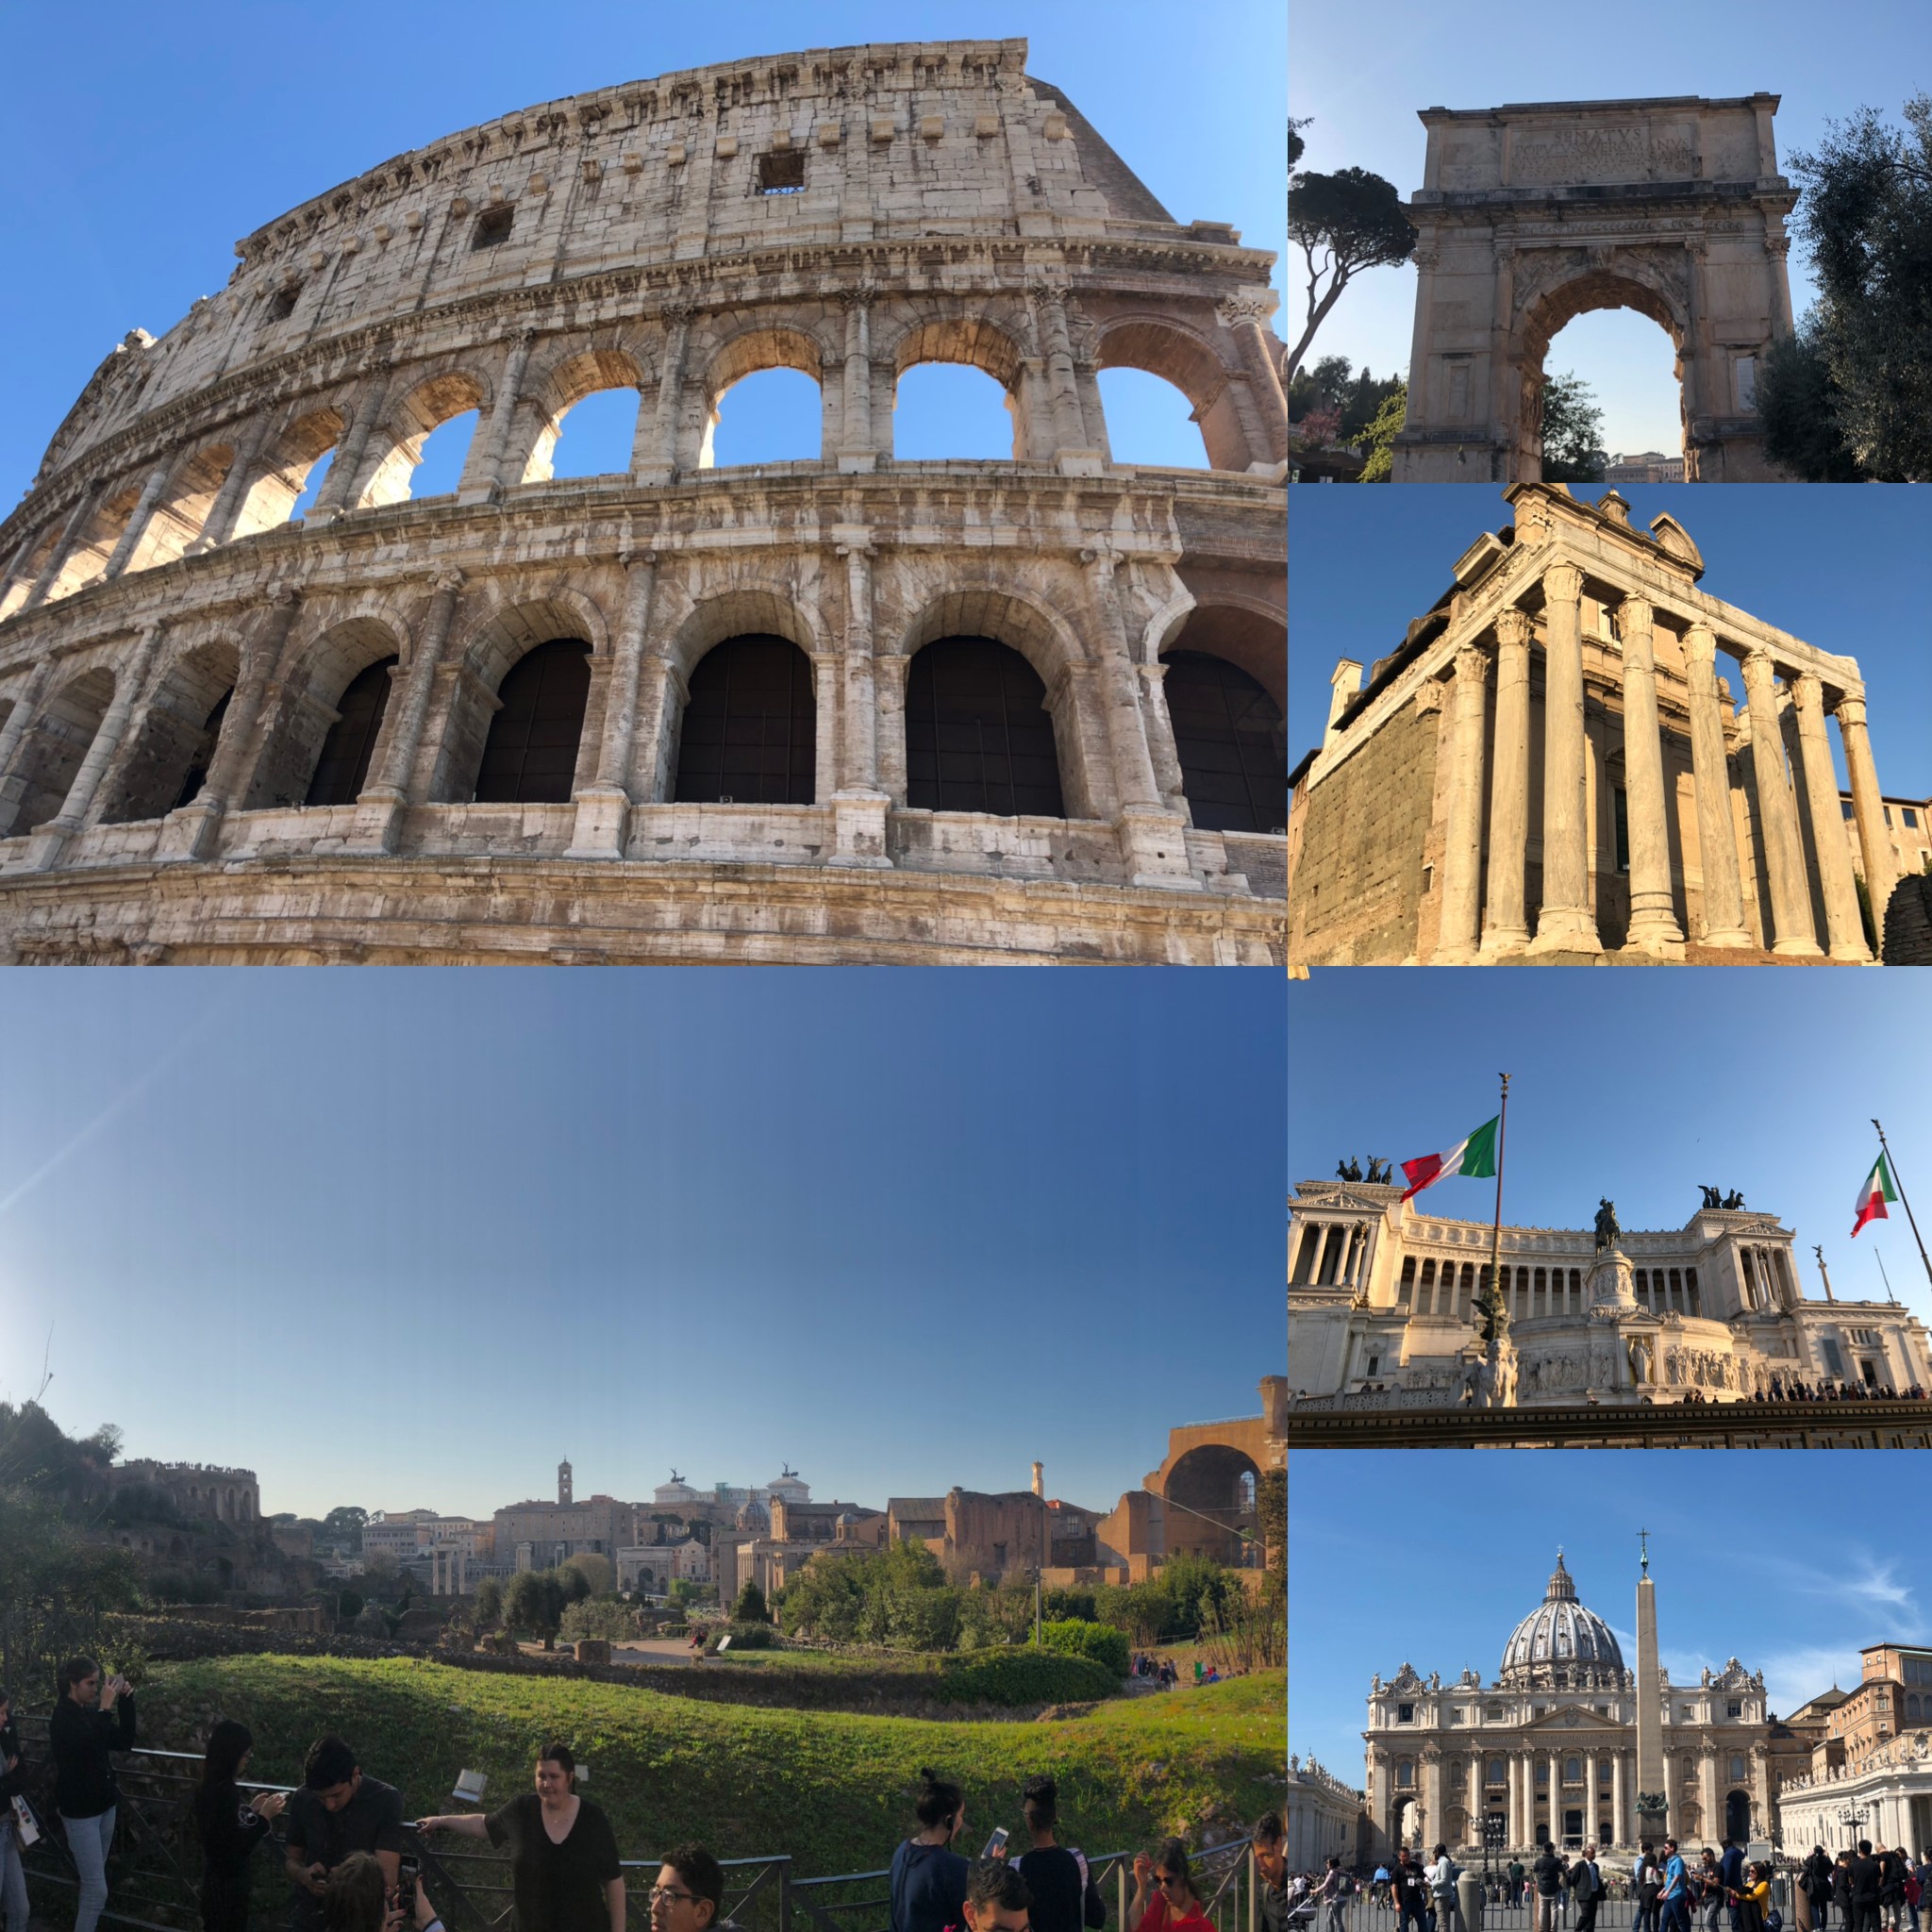 A few highlights from my Rome trip.